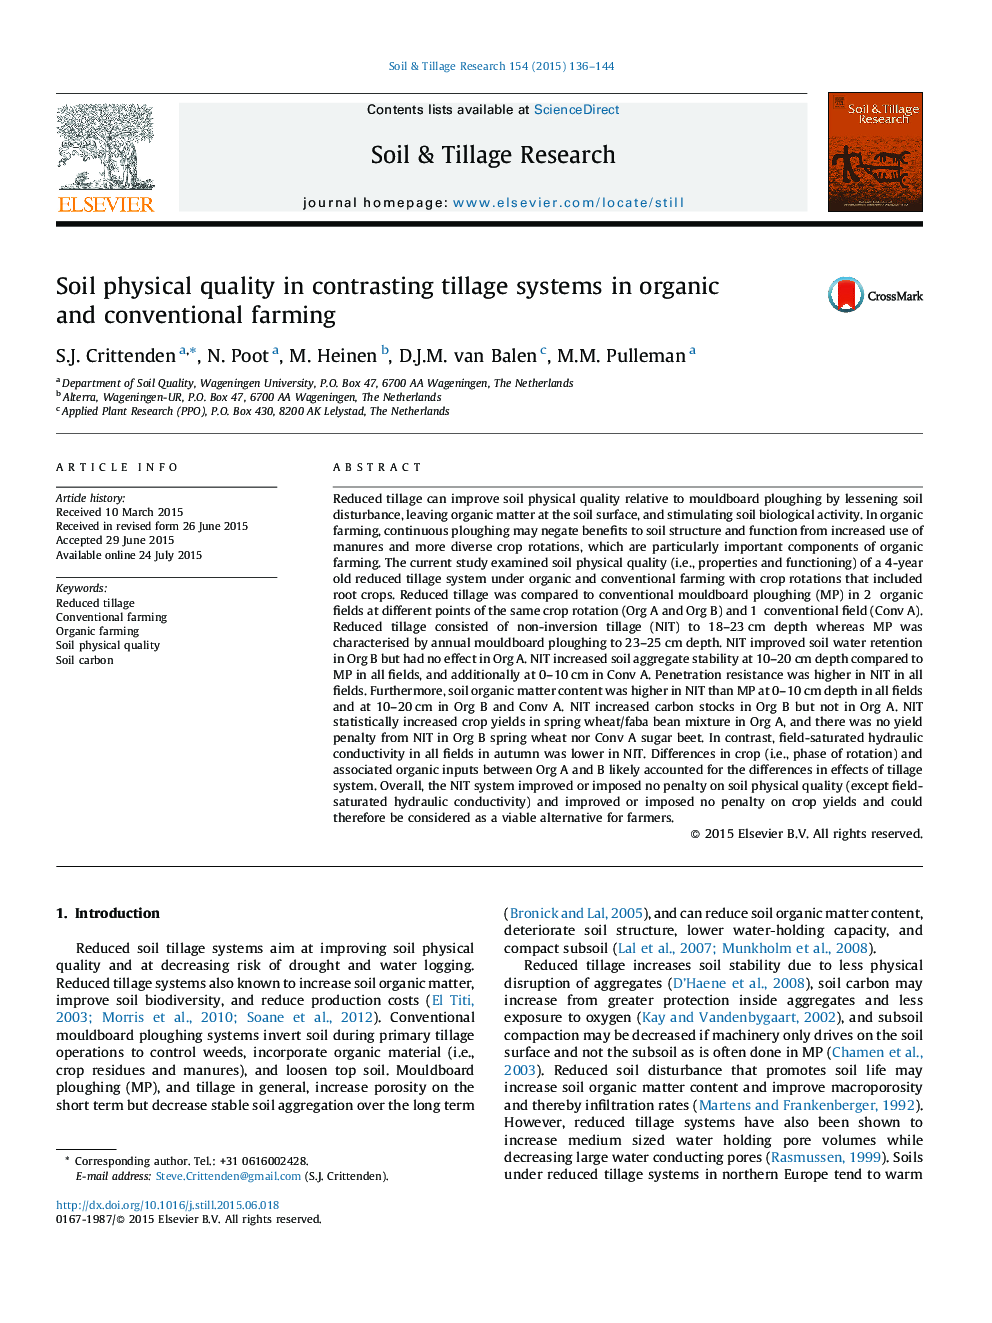 Soil physical quality in contrasting tillage systems in organic and conventional farming